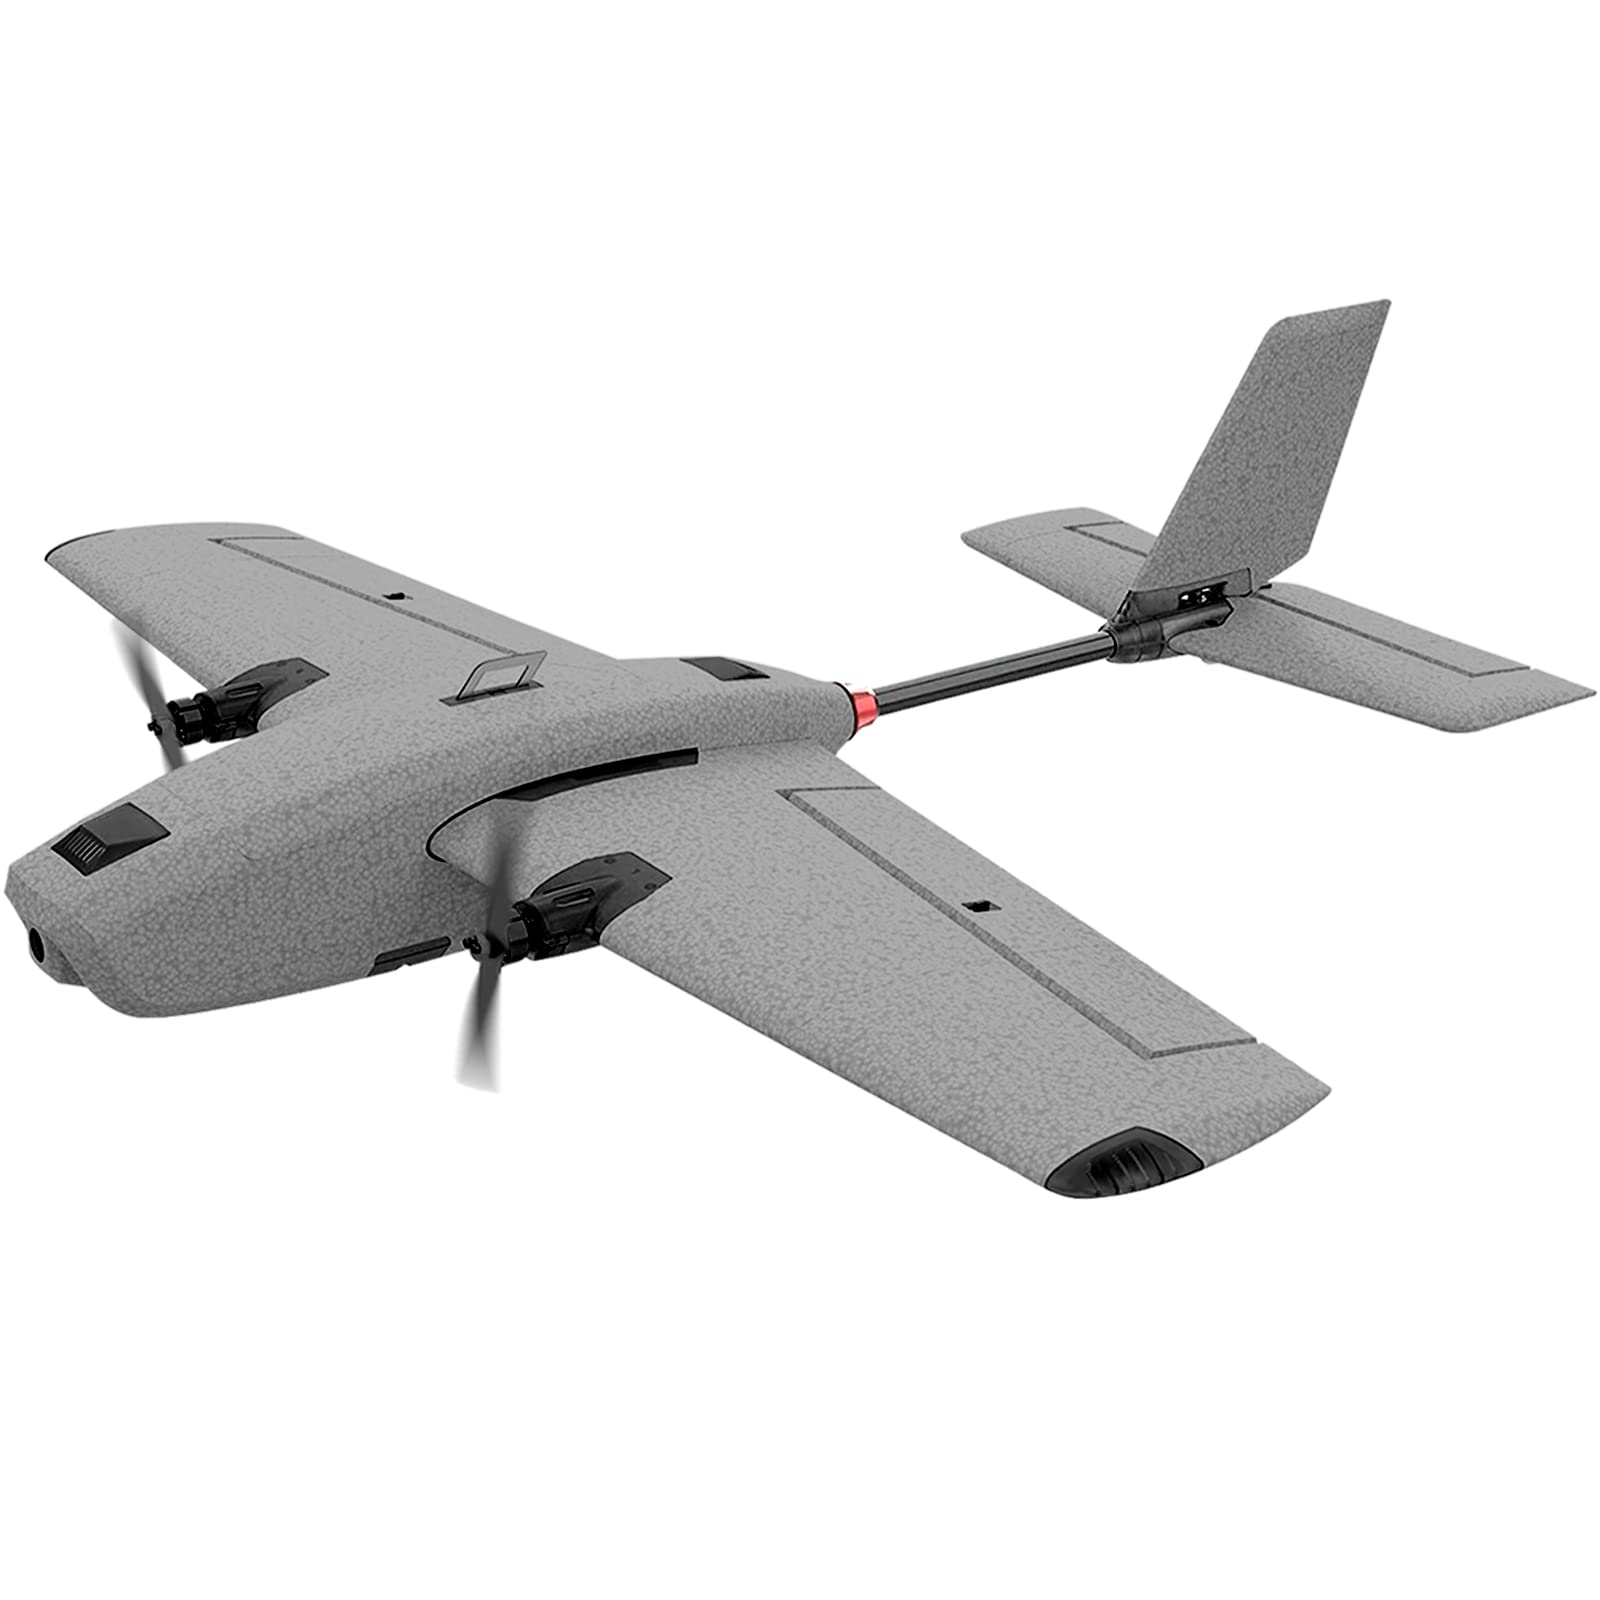 Buddy Rc Hee Wing Rc Ranger T-1 Remote Control Airplane 6Ch Rc Airplane For Adults With 730Mm Wingspan Easy Controlled Rc Plane 